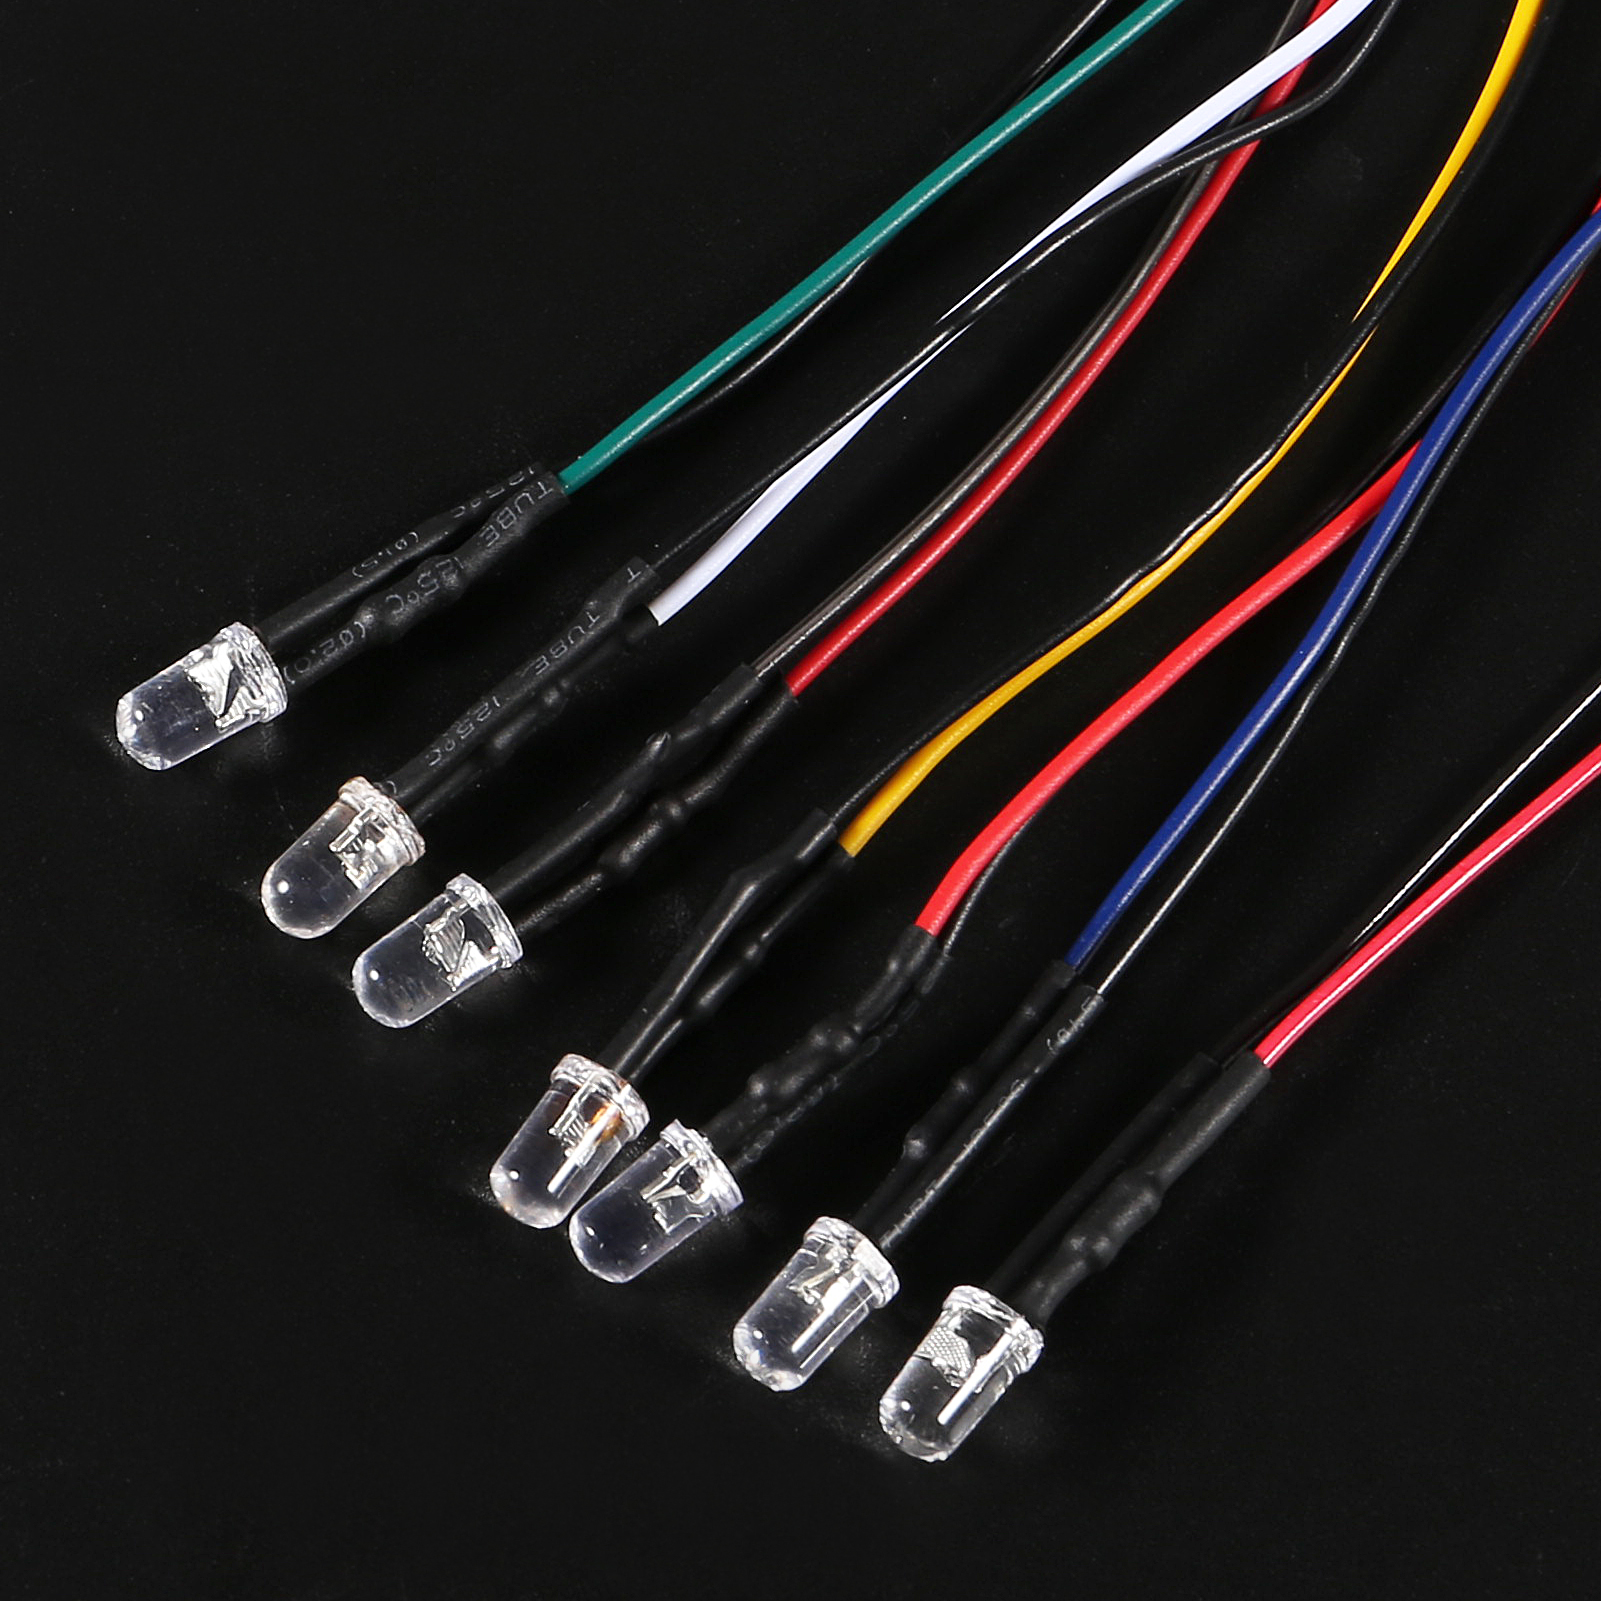 50pcs 12V 5mm LED Light Emitting Diode Pre-wired For RC Car Mini Single LED  Bulb Lamps Red/Blue/Yellow/White/Green 5 Colors 10pcs Of Each Color